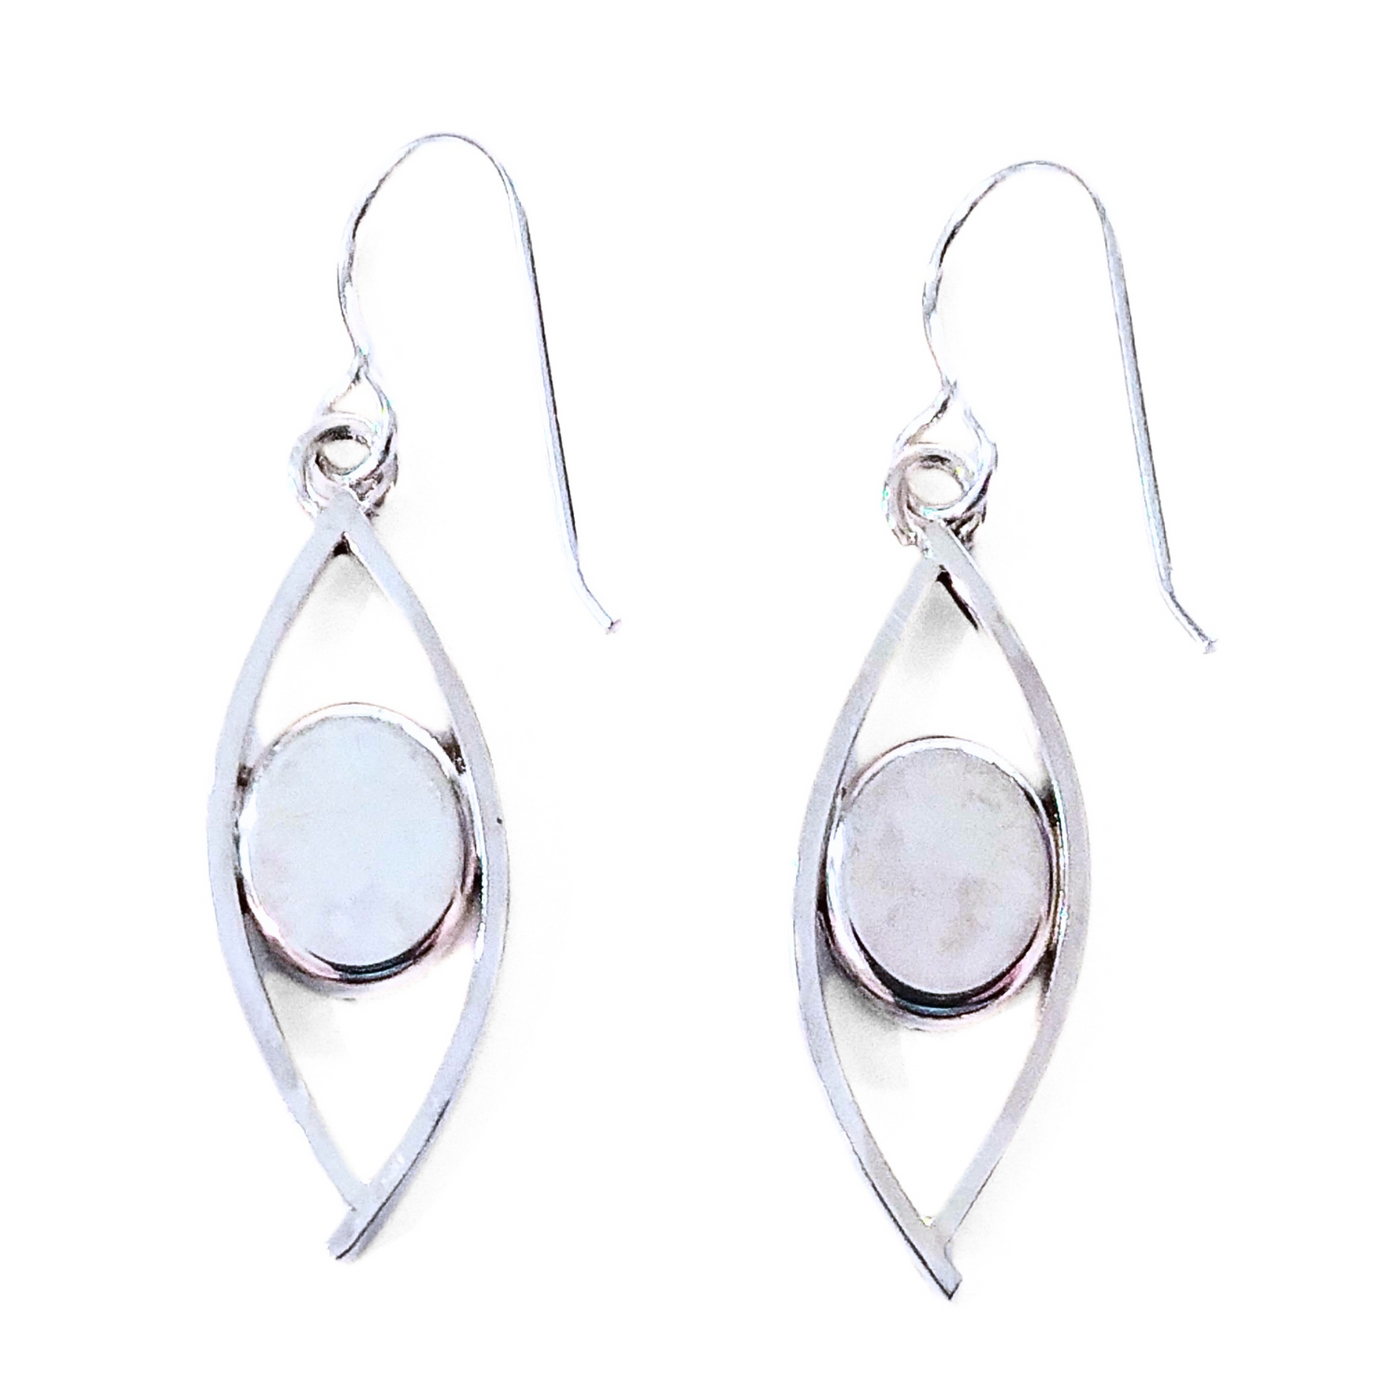 DS-357 Marquis shape Inlay Earrings